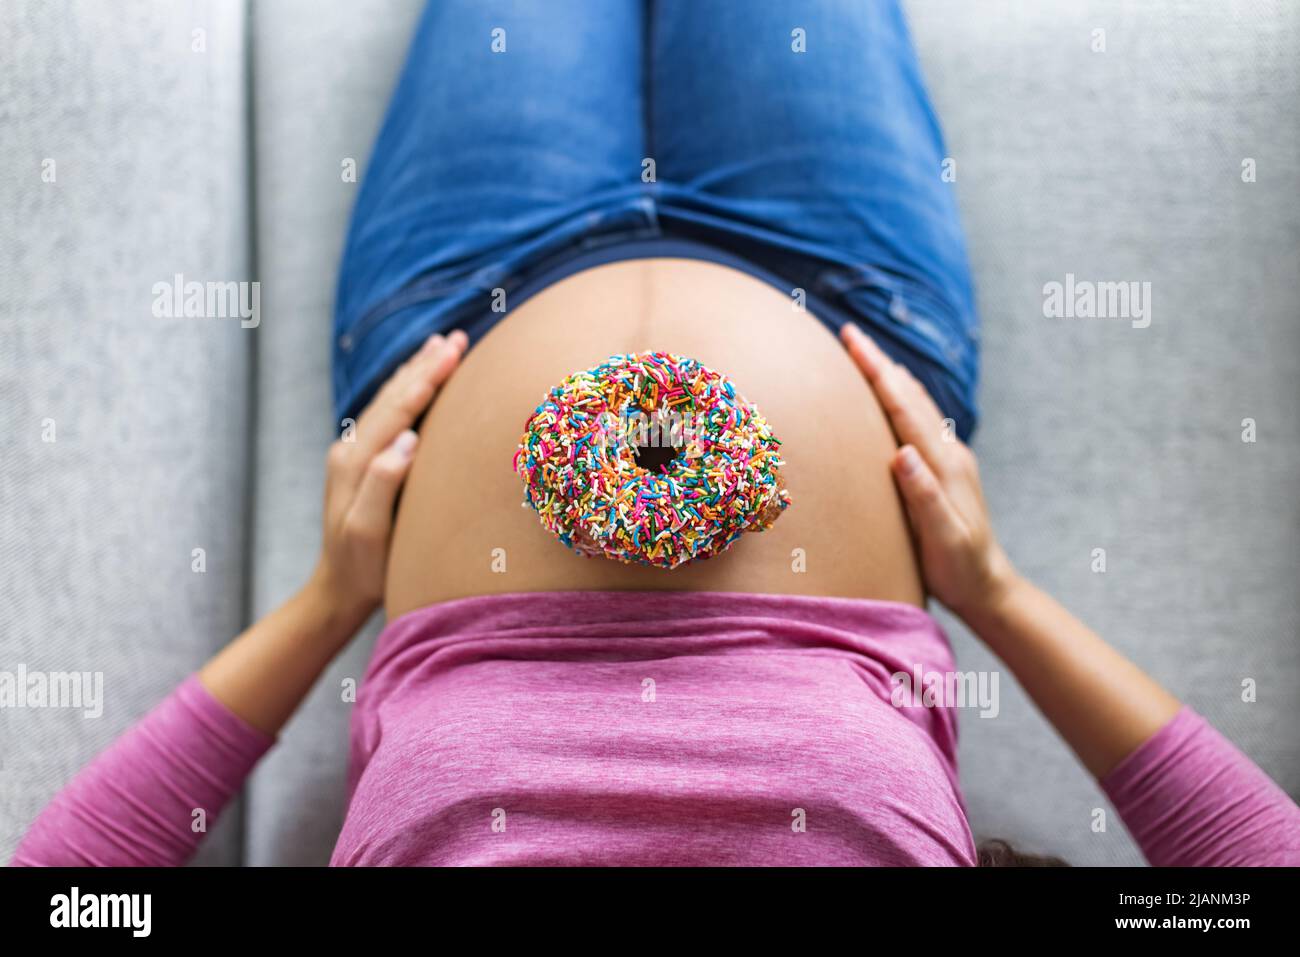 Pregnant woman with donut on belly top view. Cravings of desserts and sweets during pregnancy, Pastry with birthday cake sprinkles on baby bump for Stock Photo